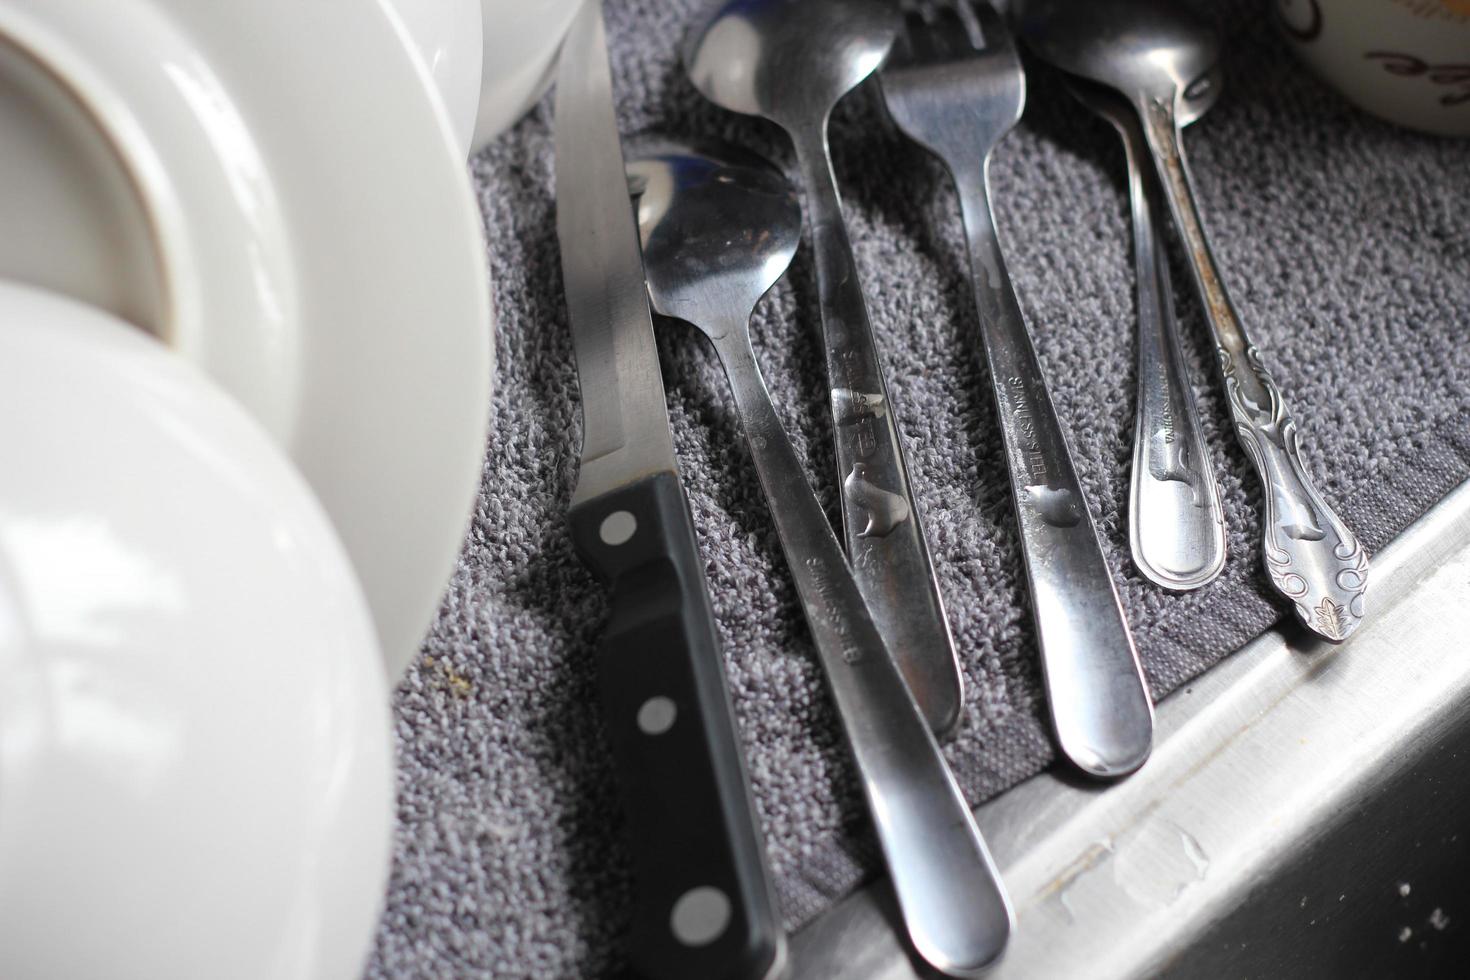 Spoons, fixings, knives and dishes are placed around the sink after washing. photo